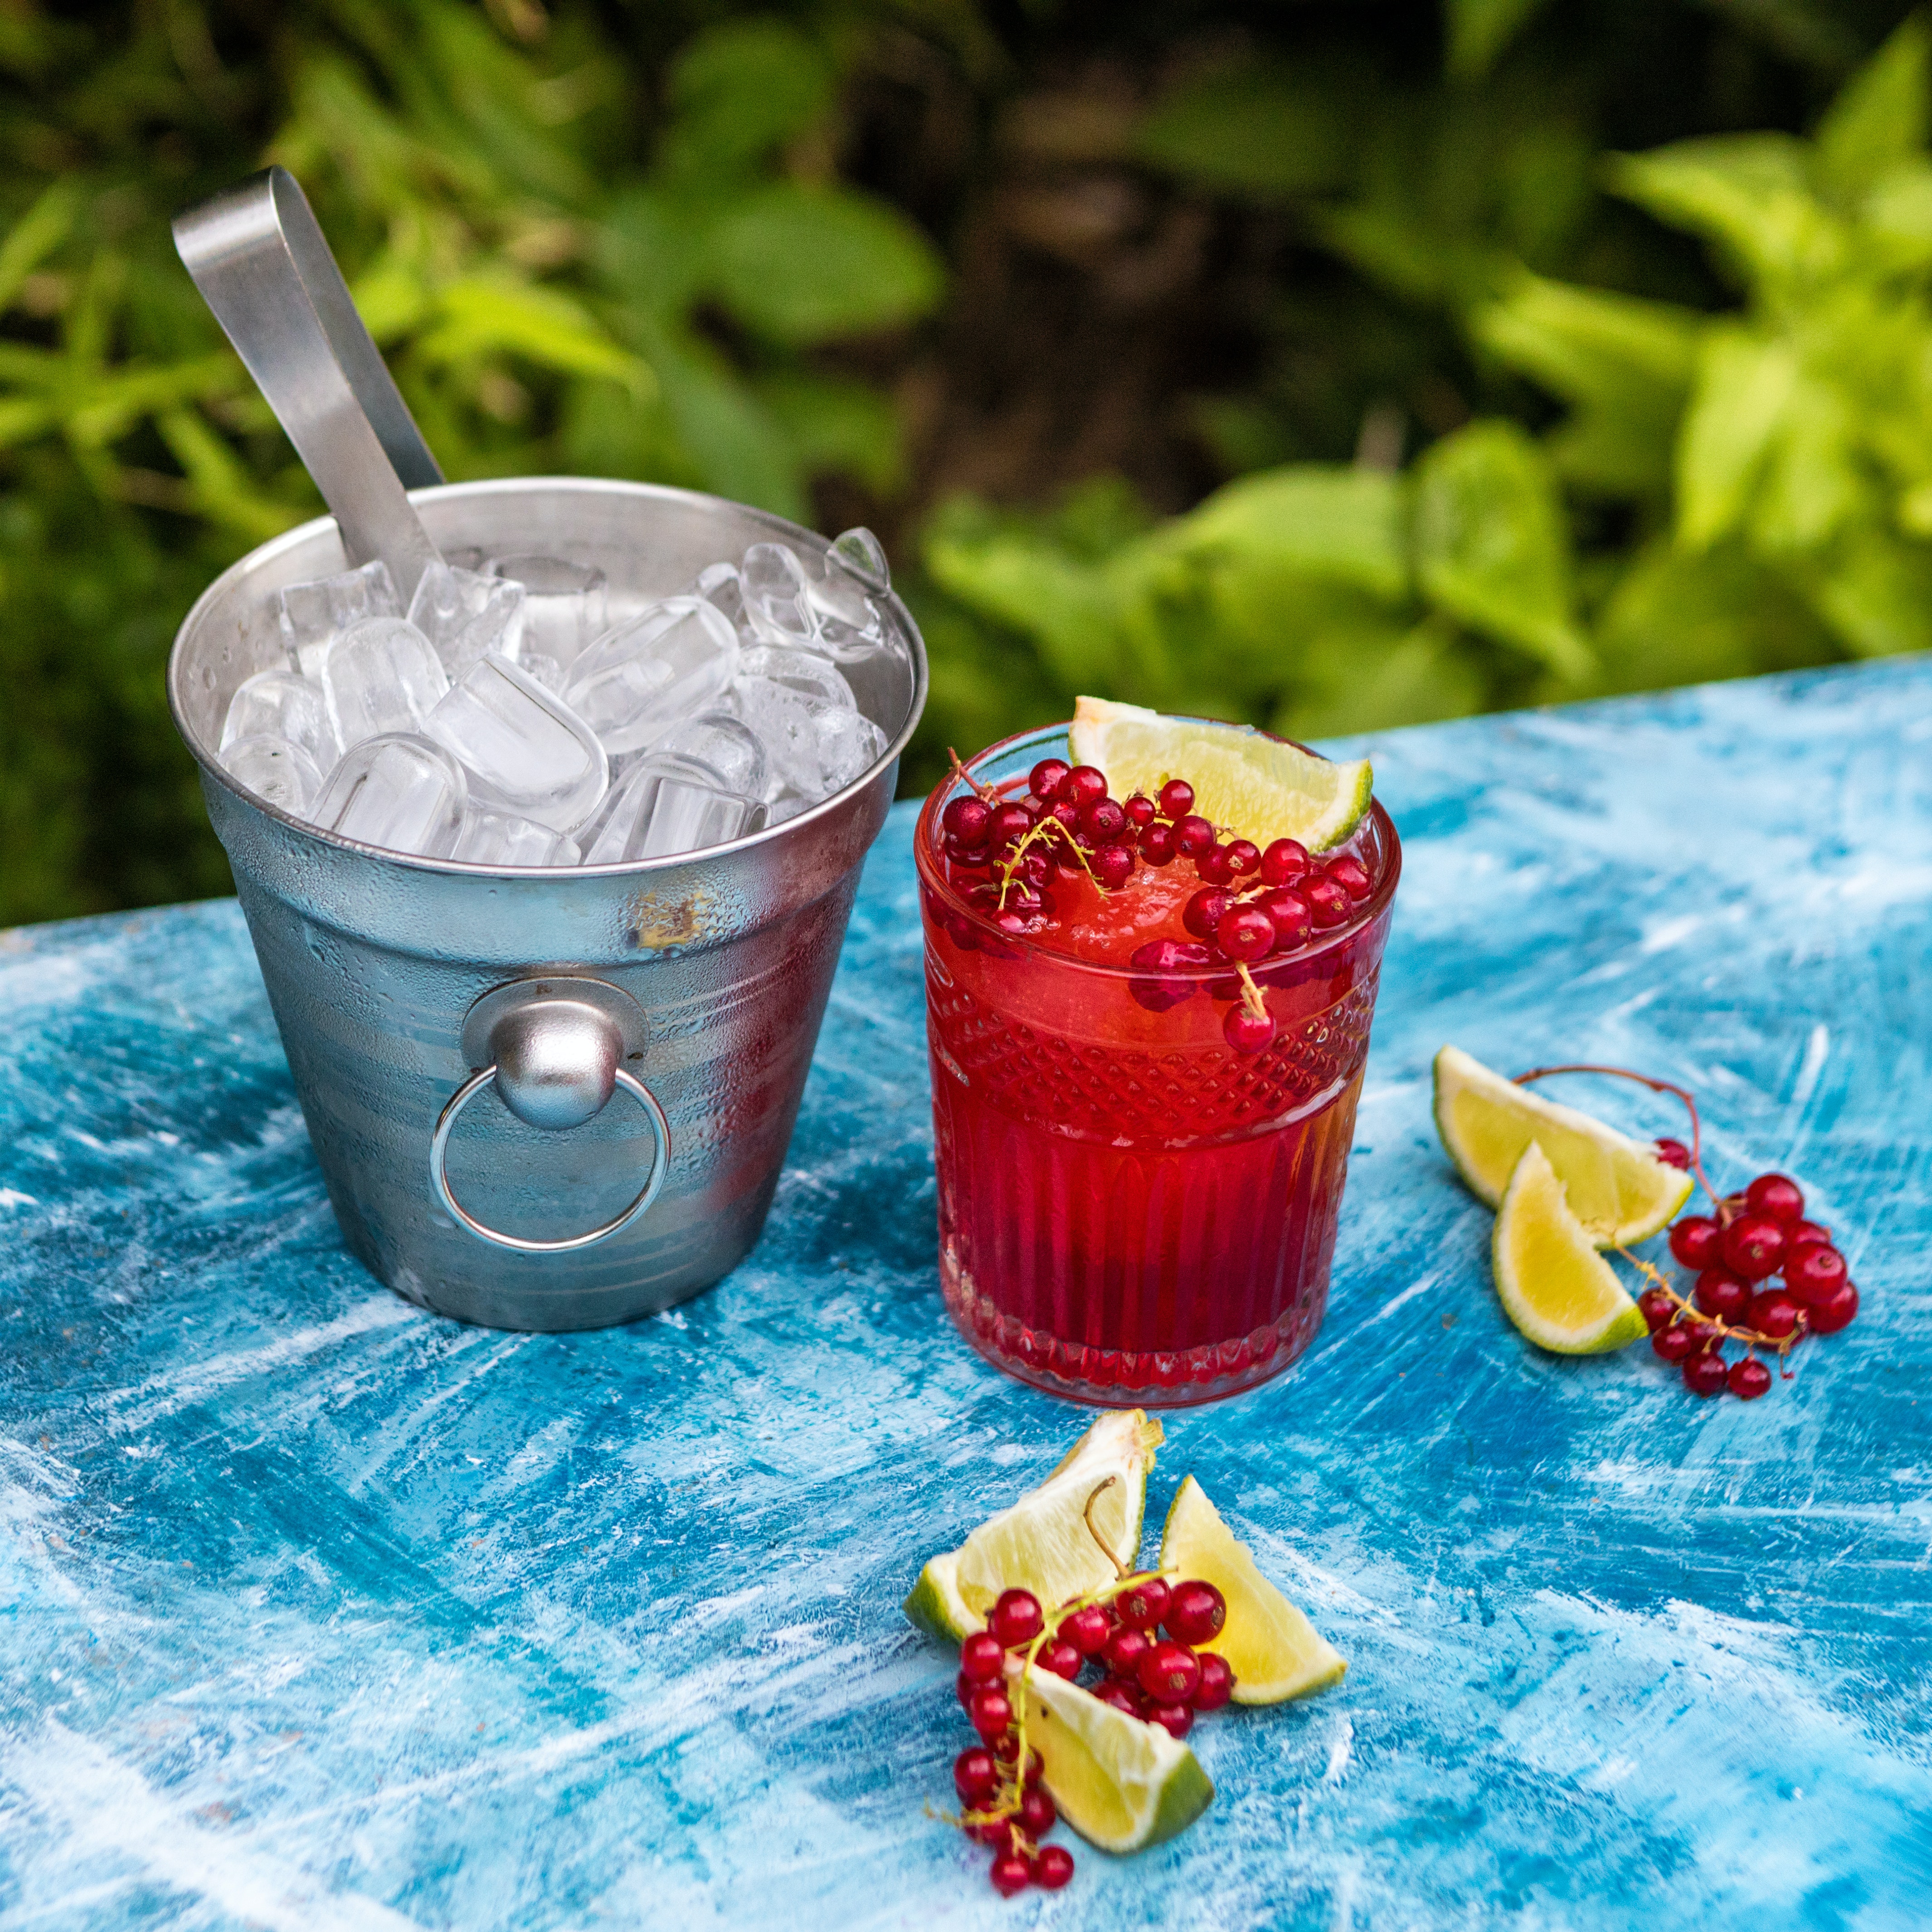 Who Knew An Ice Bucket Was A Home Bar Essential?